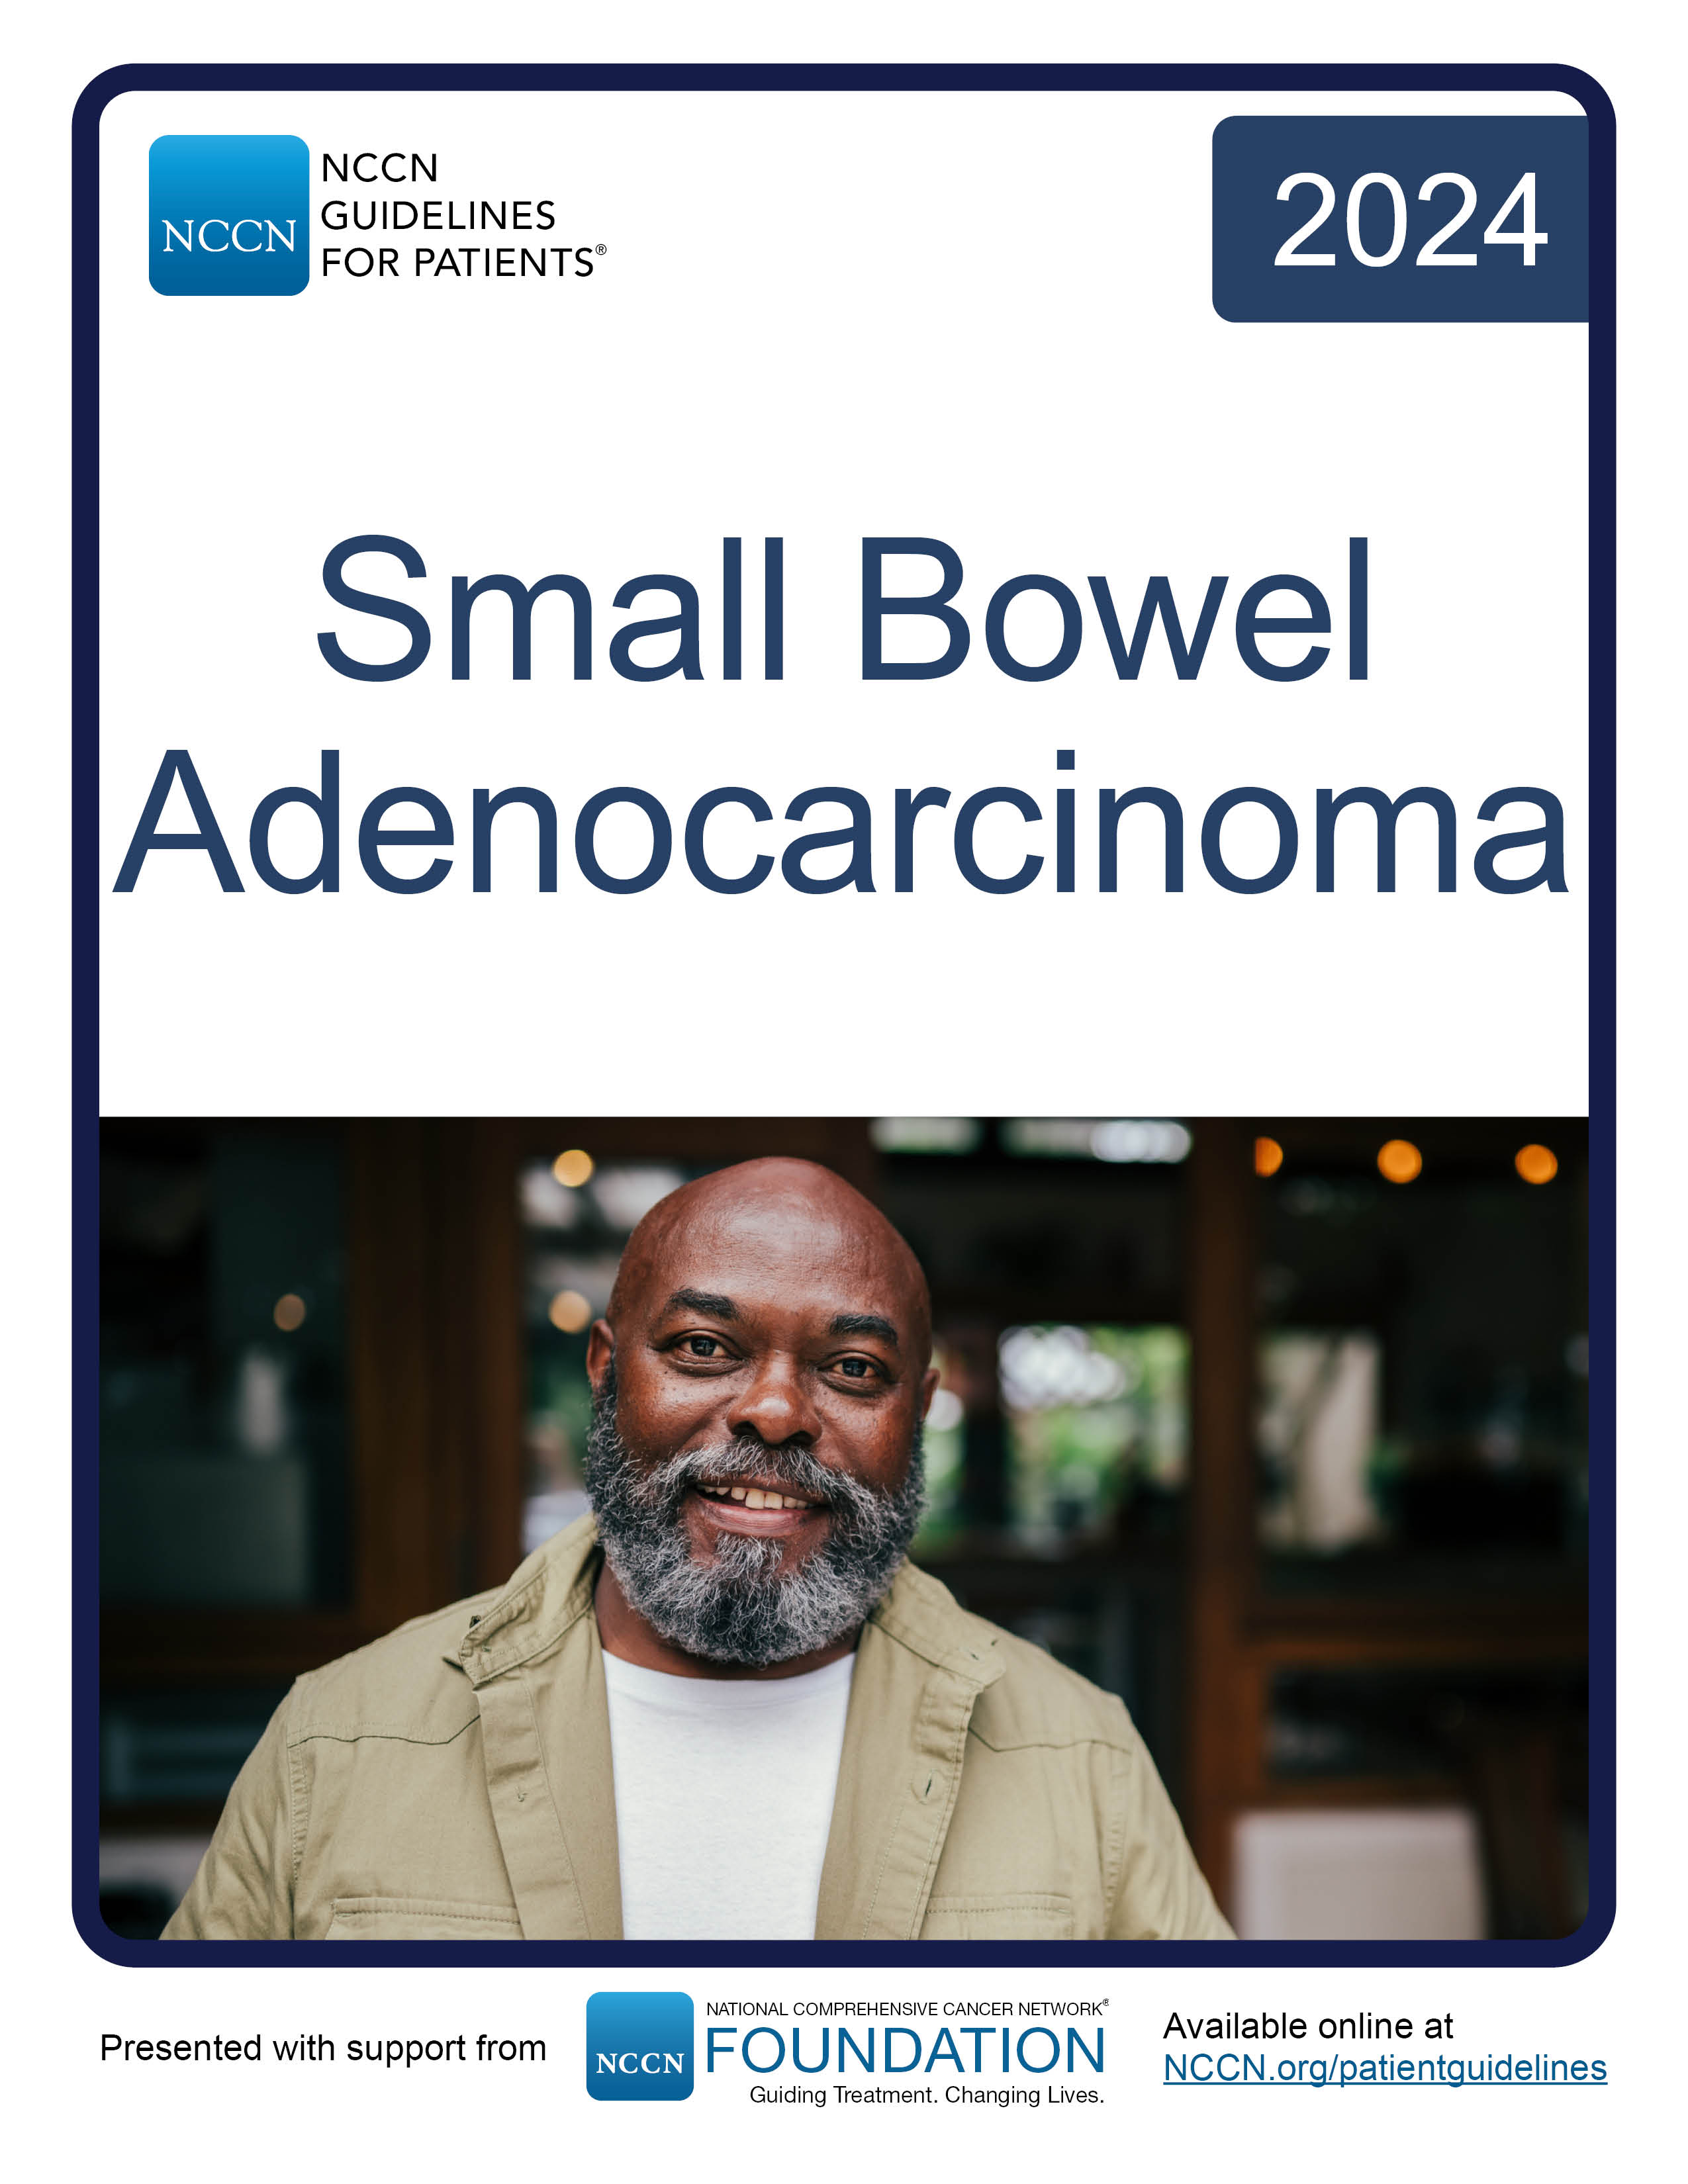 NCCN Guidelines for Patients: Small Bowel Adenocarcinoma